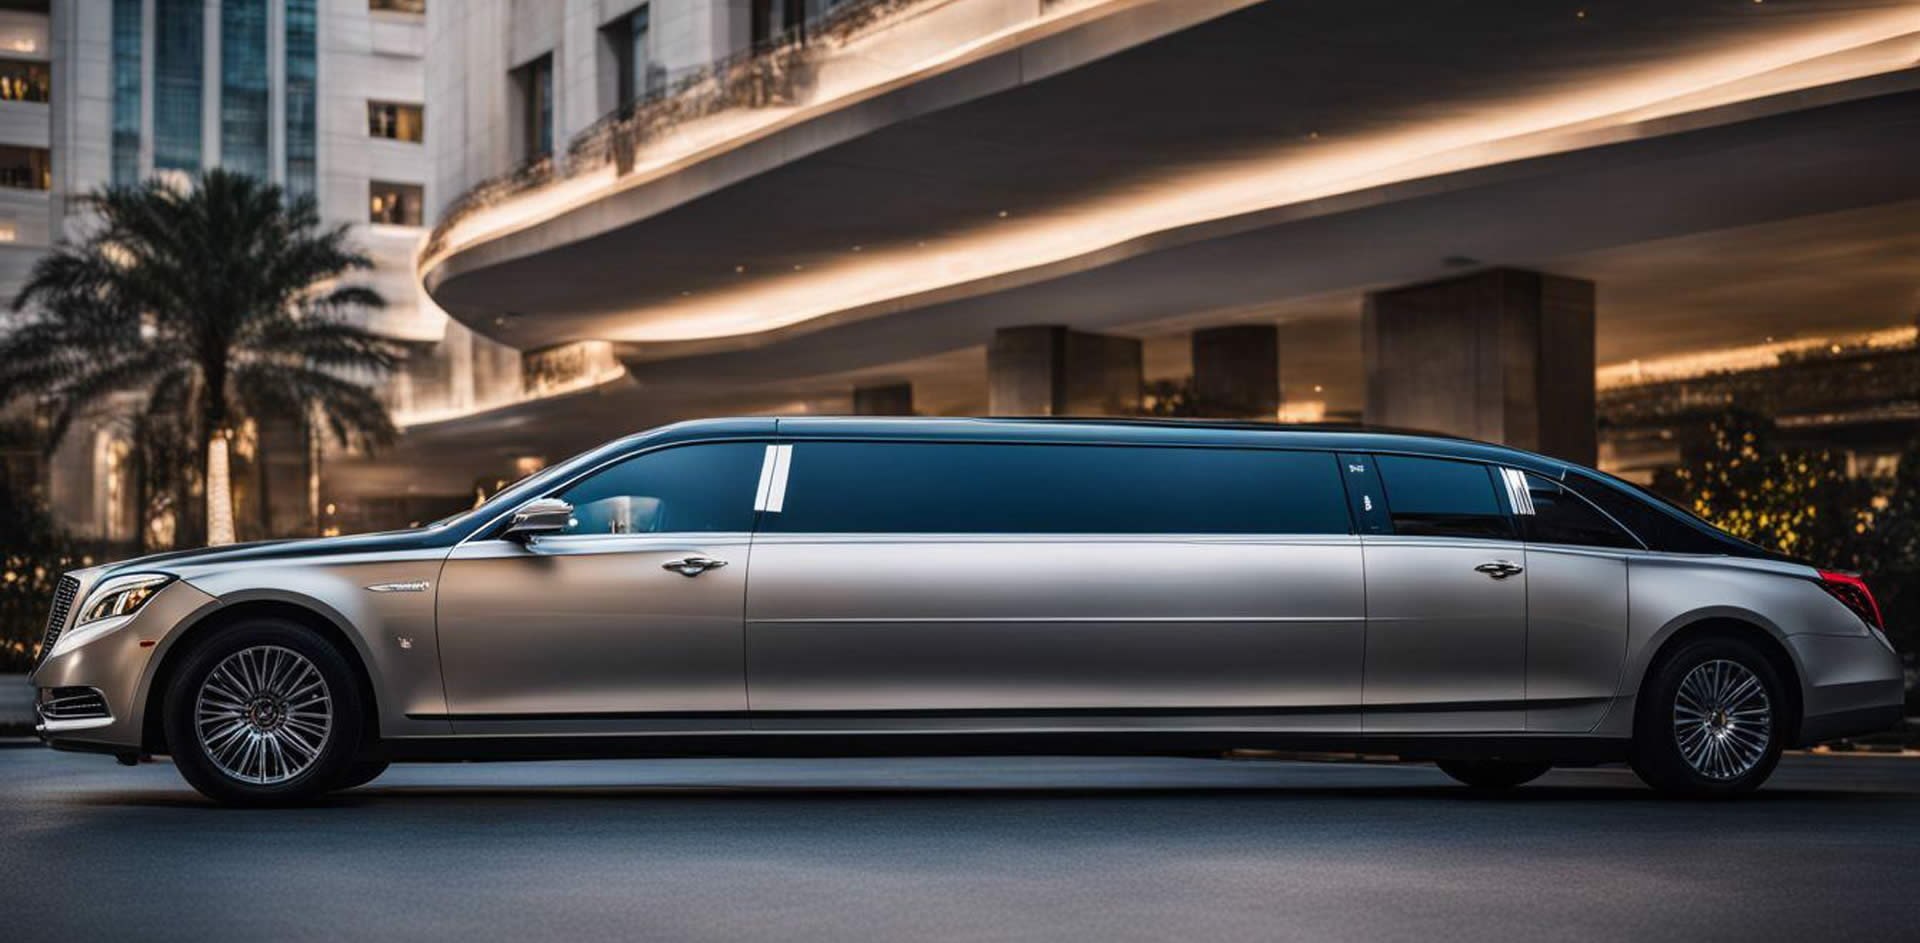 A long limo on the street